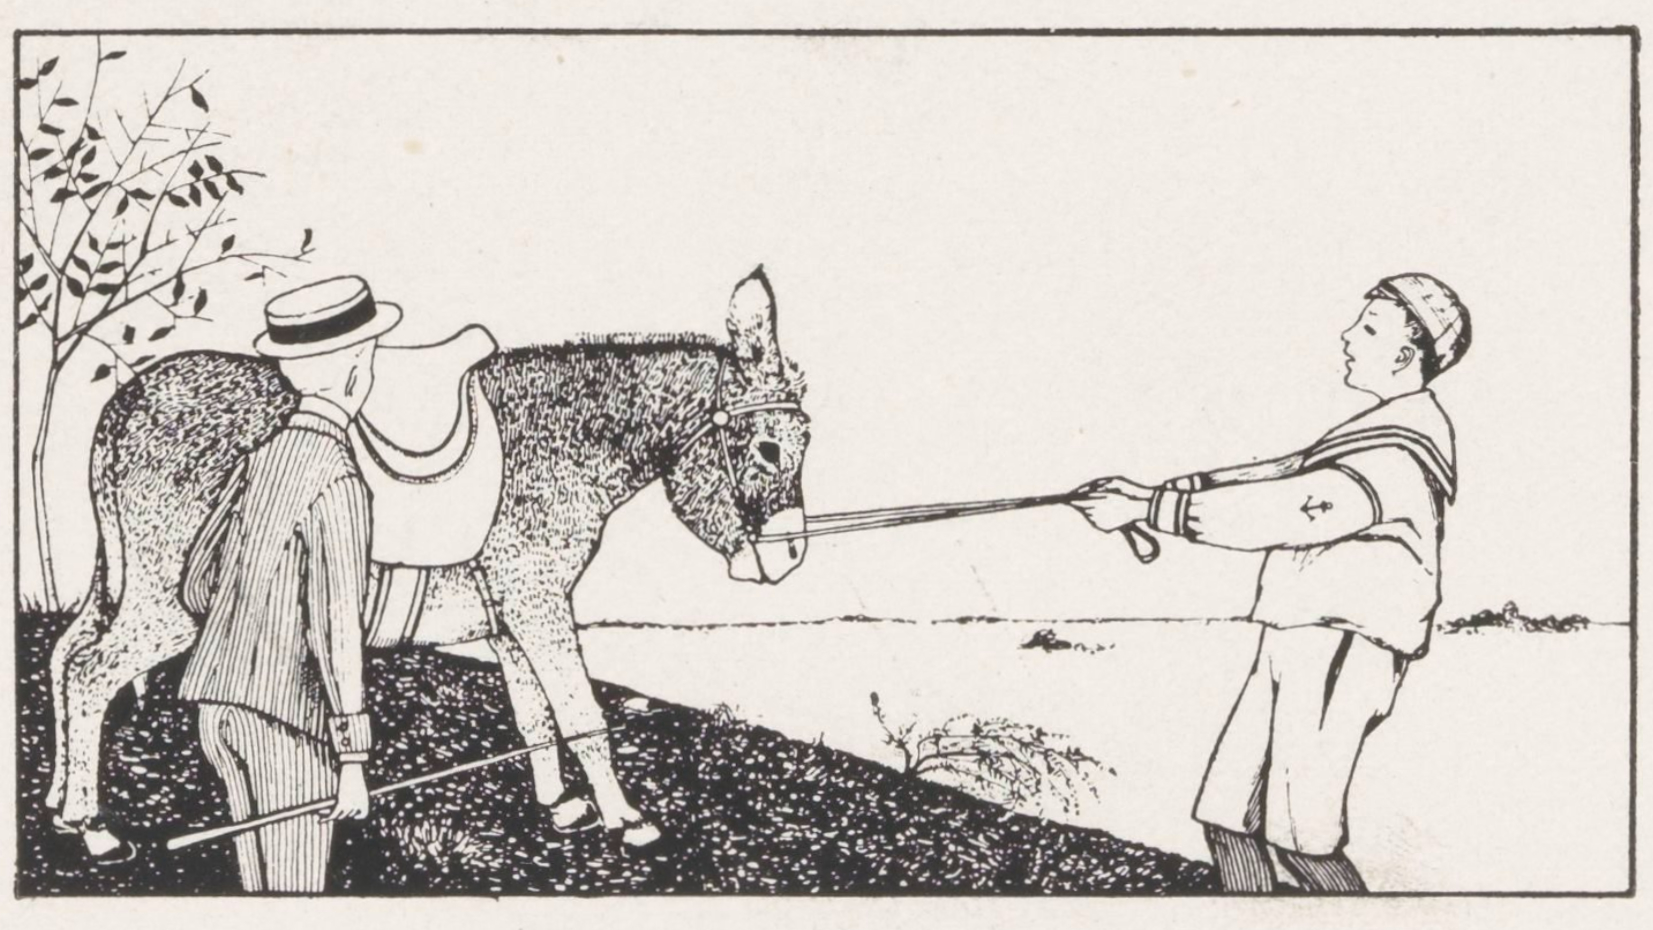 A 20th-century print of two boys and a donkey by Julie de Geluk.